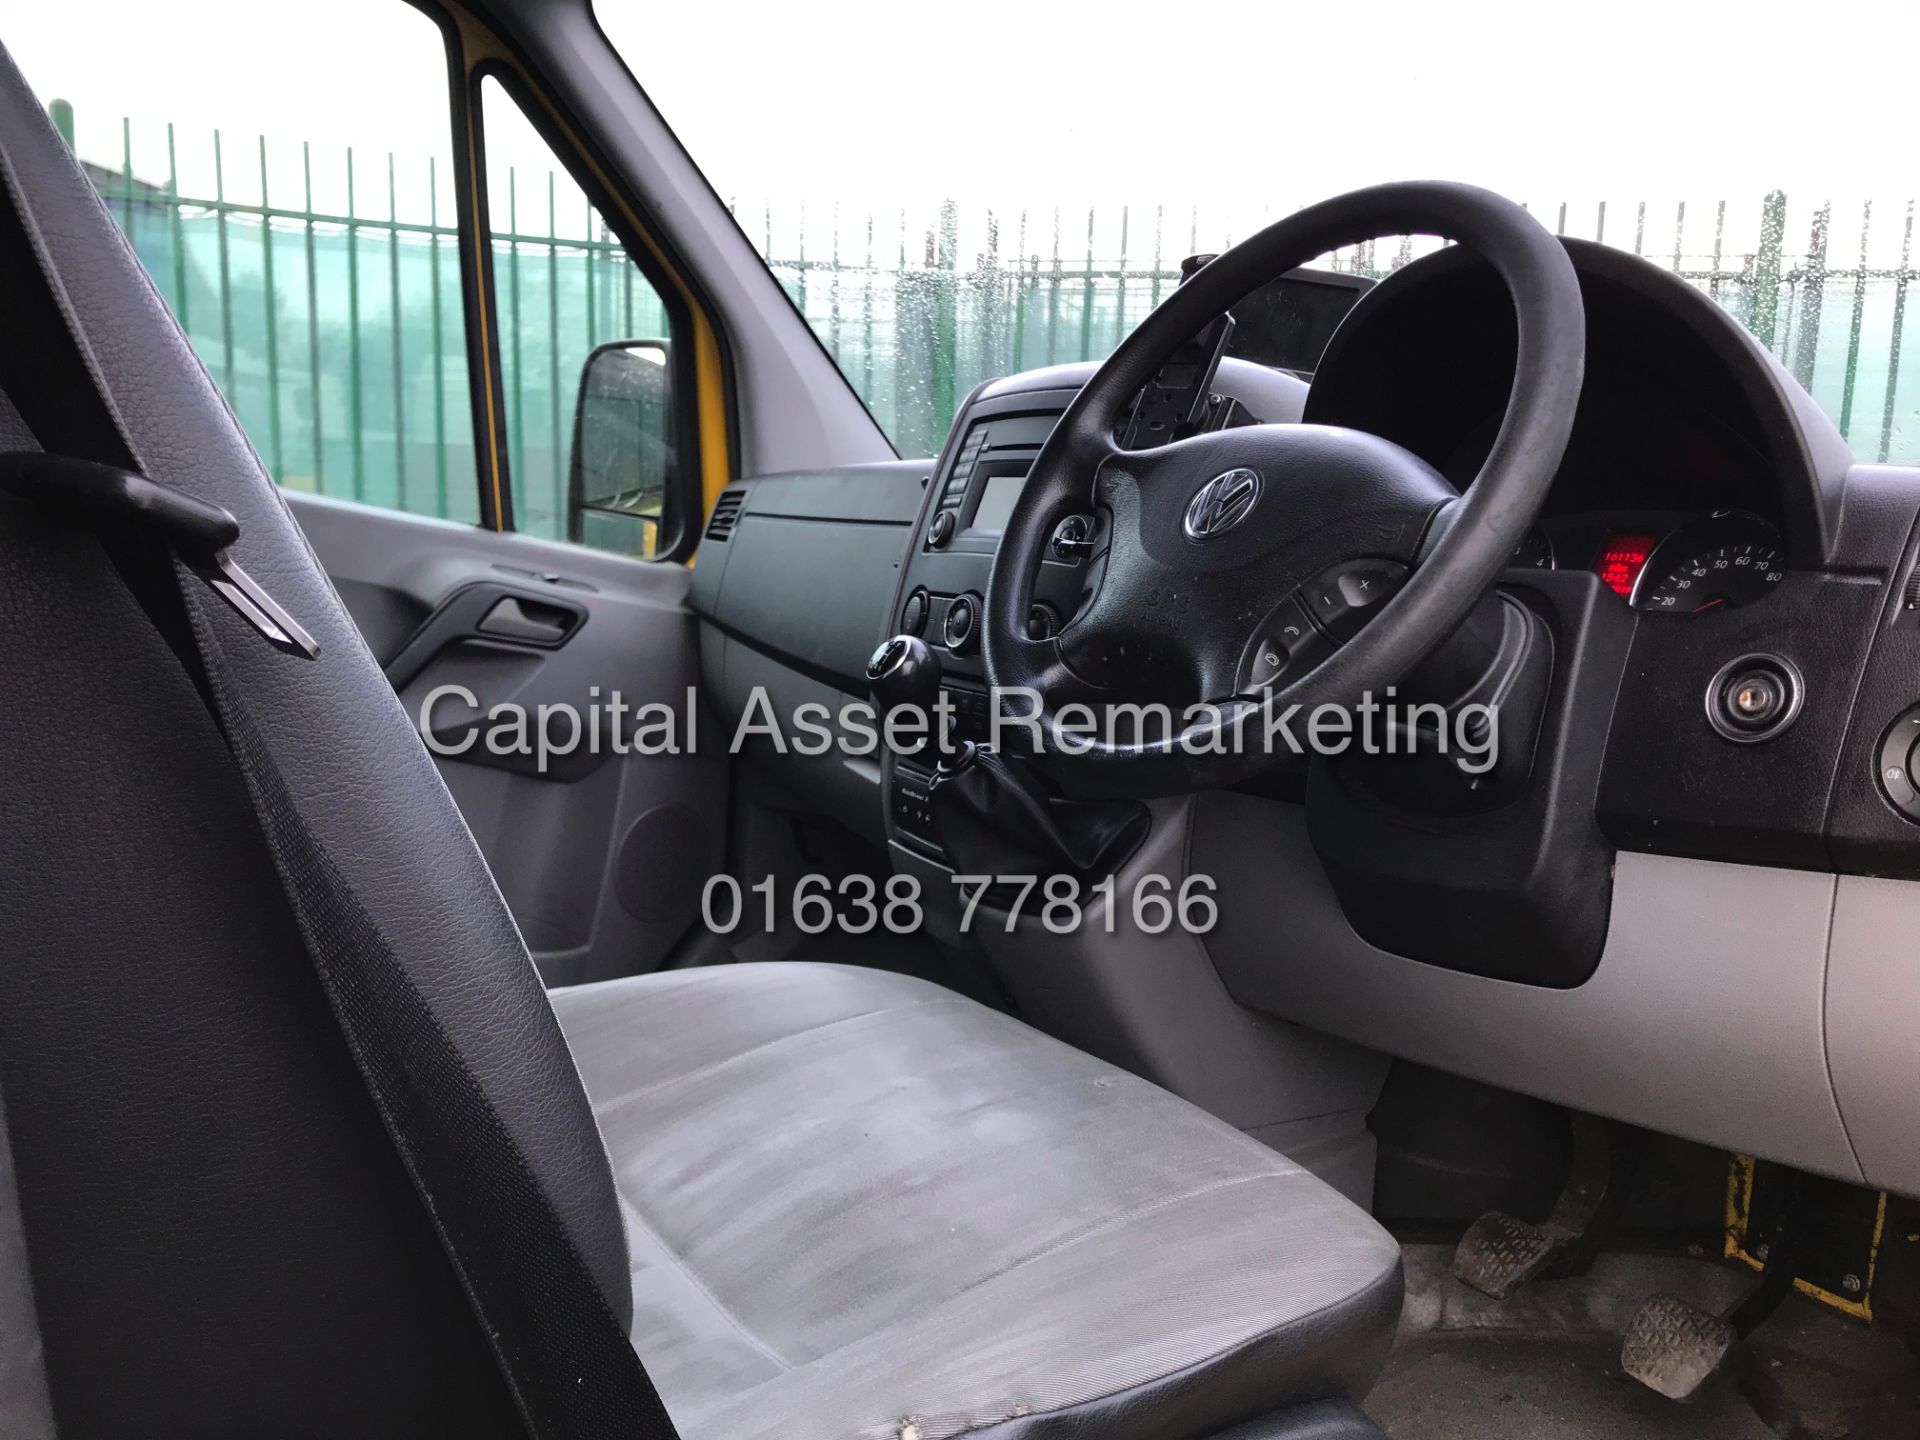 (On Sale) VOLKSWAGEN CRAFTER 2.0TDI CR35 "136BHP" MWB (2014 MODEL) 1 OWNER - AIR CON - FSH - Image 7 of 10